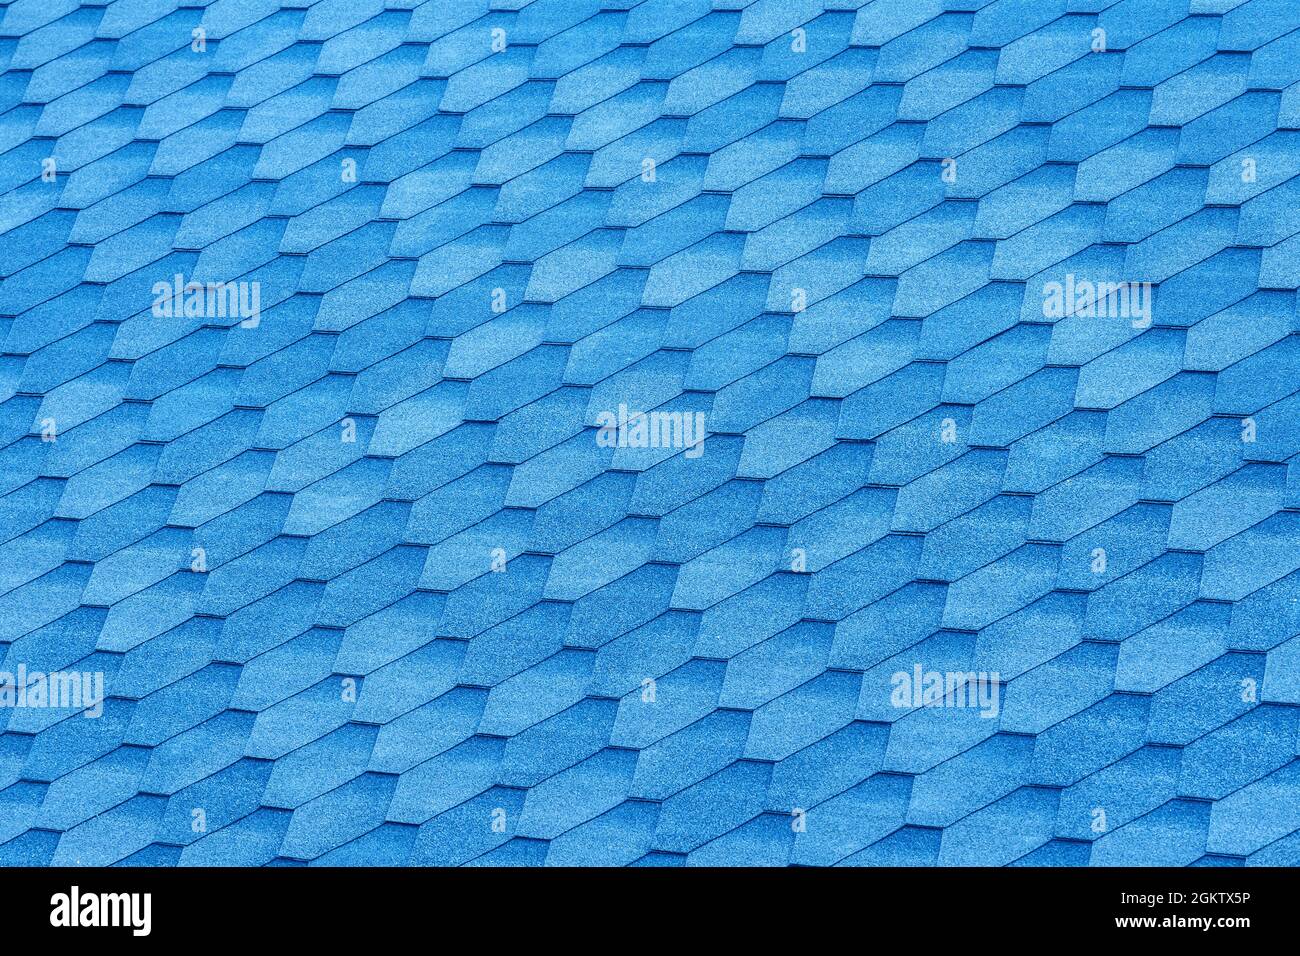 Roof tile geometric style pattern, mosaic blue abstract texture, square detail background. Stock Photo